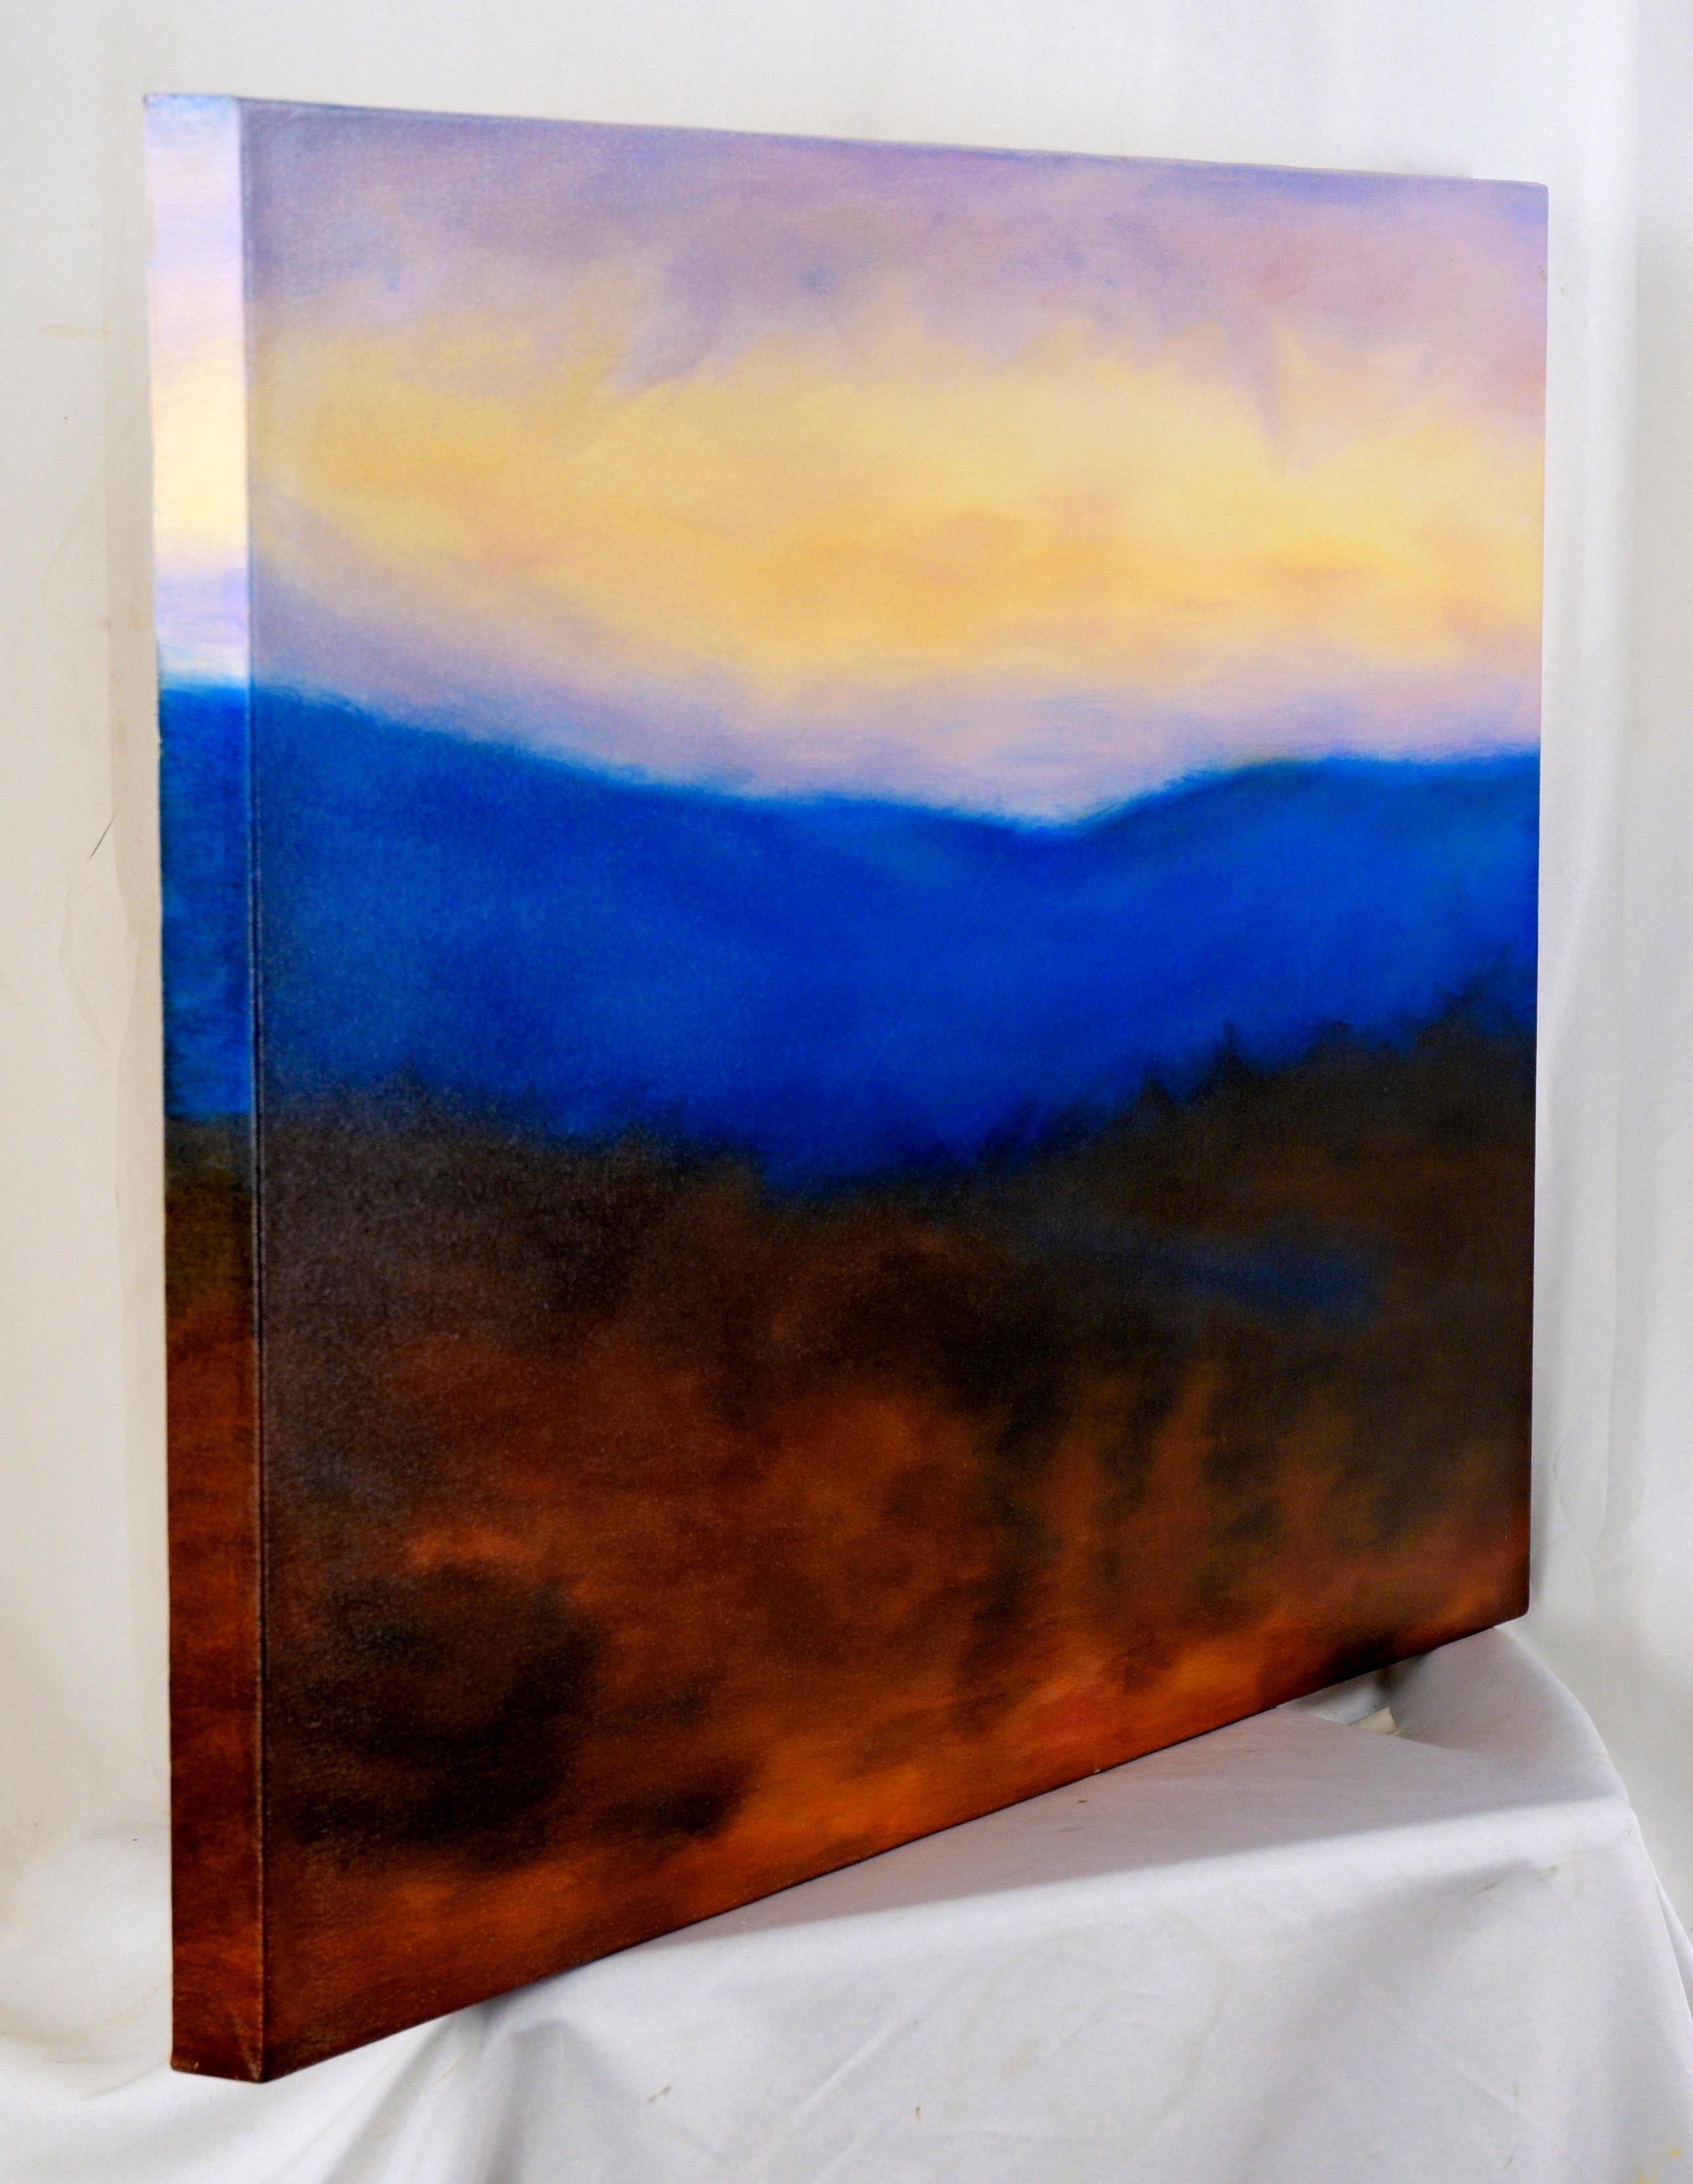 Hazy Sunrise with Blue Mountains - Landscape in Oil on Canvas

Vibrant landscape with blue mountains by Kelly Cool Lucas (American, b. 1974). A line of bold blue mountains crosses the composition, dividing the painting into three distinct sections.